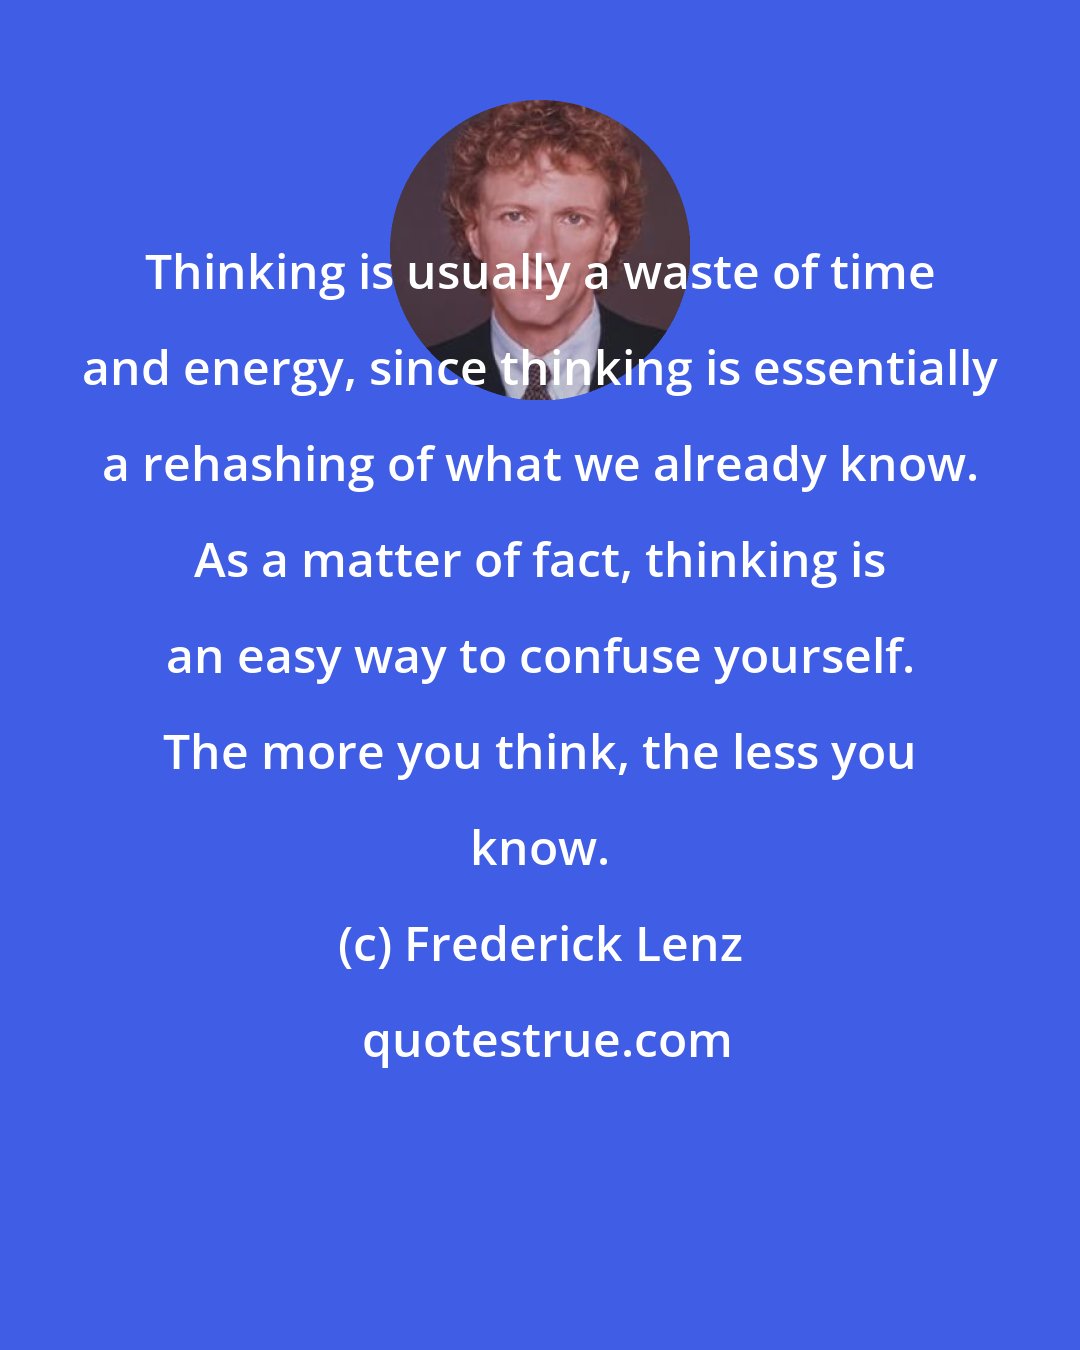 Frederick Lenz: Thinking is usually a waste of time and energy, since thinking is essentially a rehashing of what we already know. As a matter of fact, thinking is an easy way to confuse yourself. The more you think, the less you know.